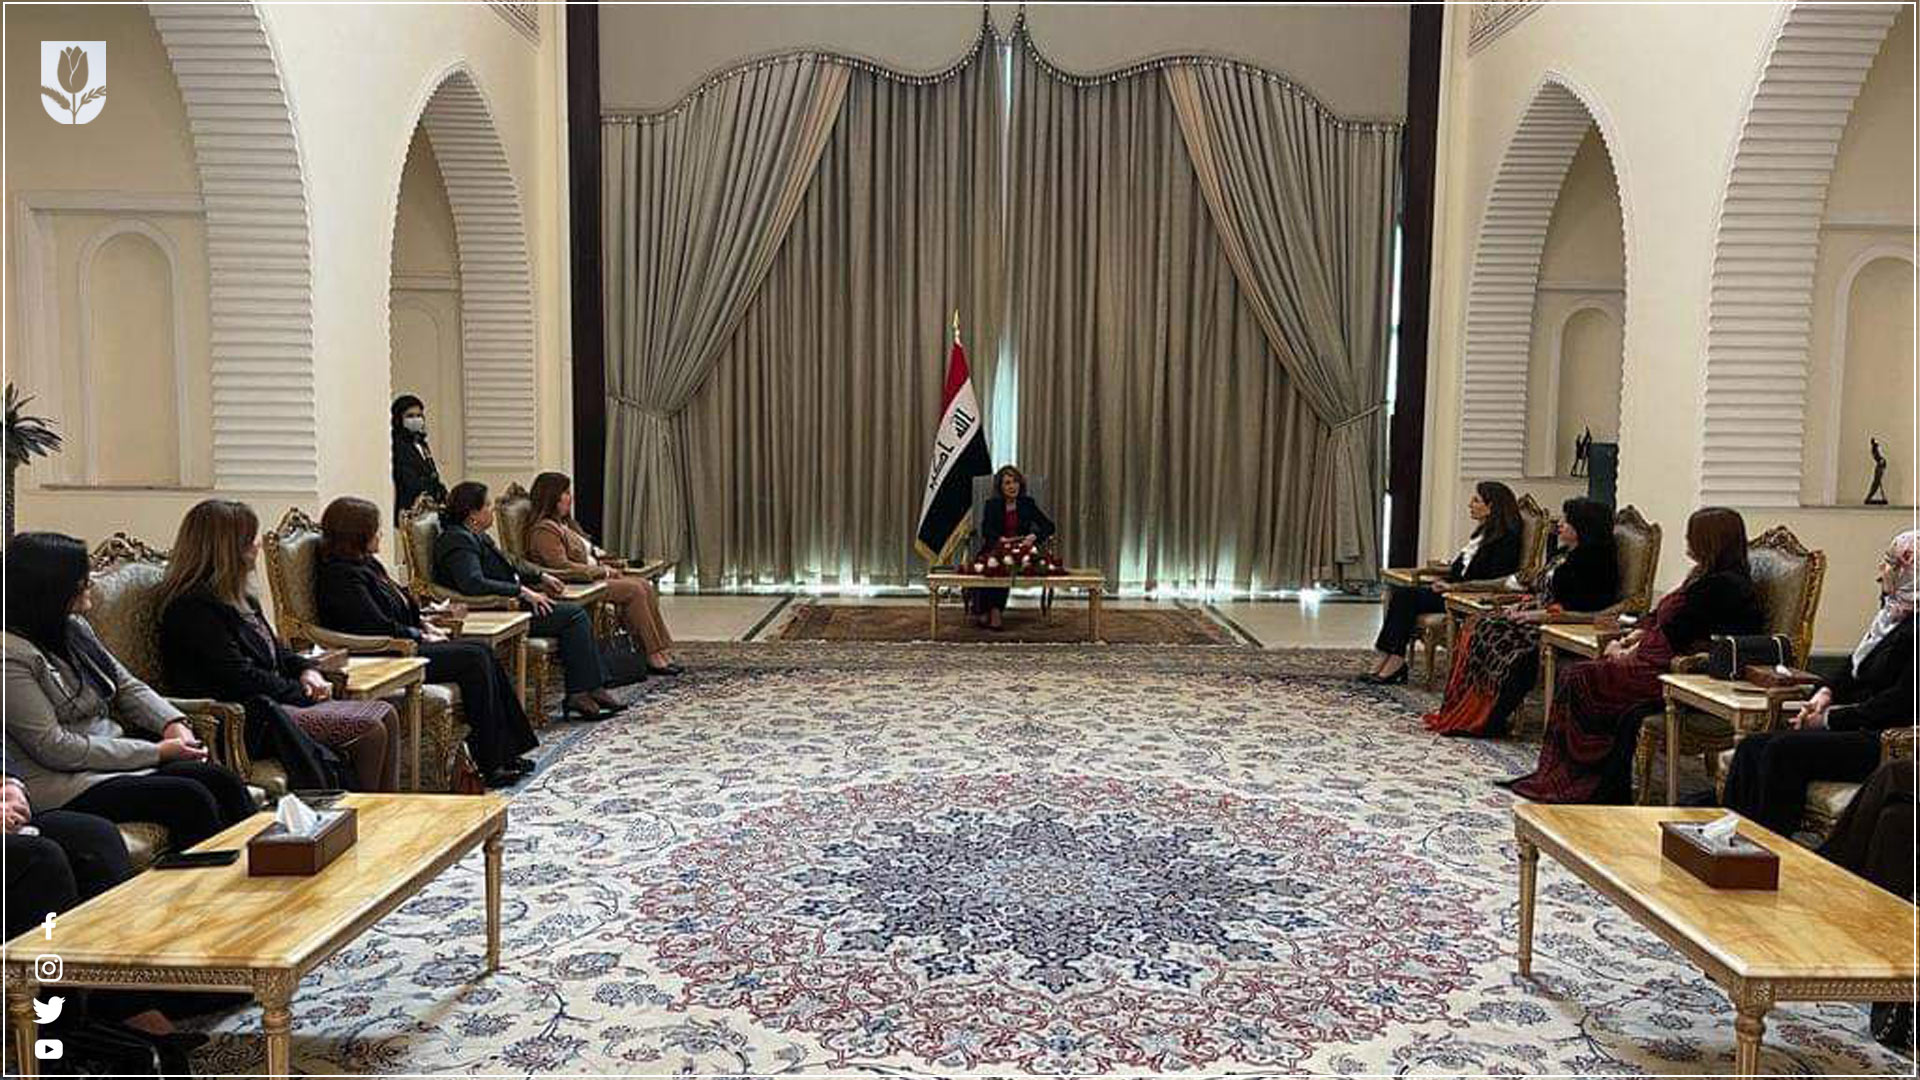  The Iraqi First Lady with Kurdish lawmakers at Al-Salam Palace in Baghdad